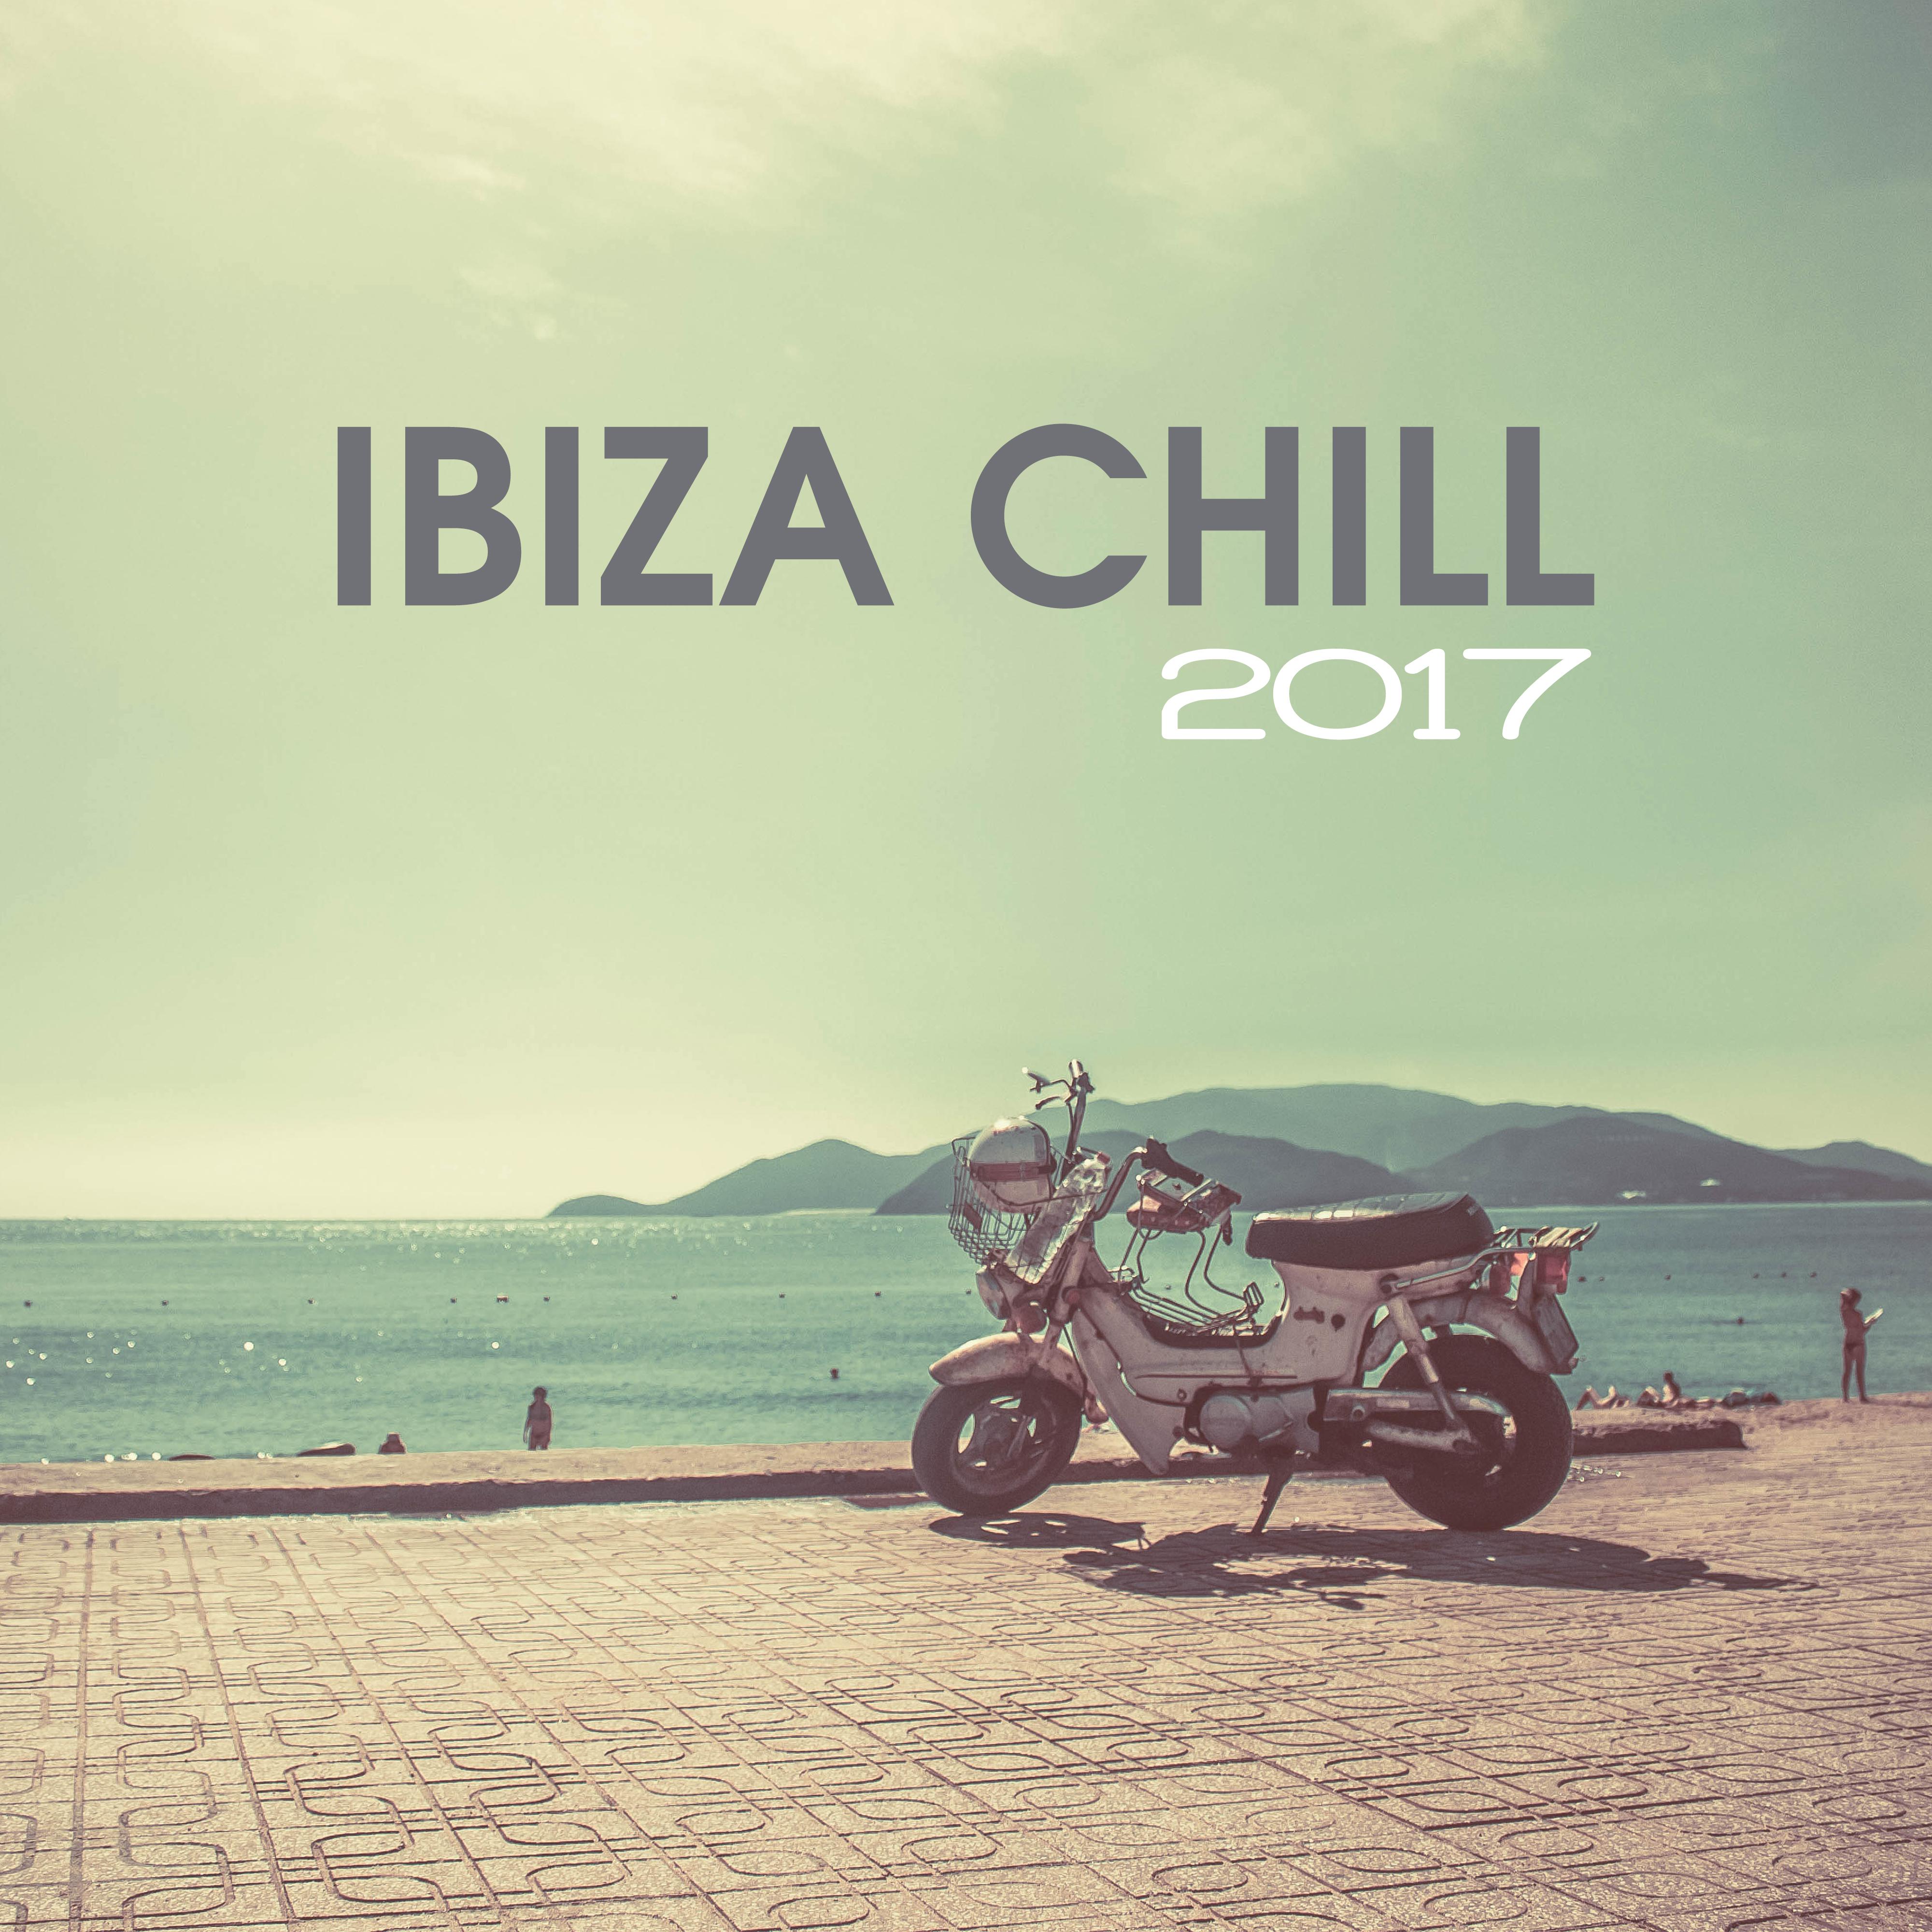 Ibiza Chill 2017 – Best Holiday Music, Lounge Tunes, Summer Dreams, Relax